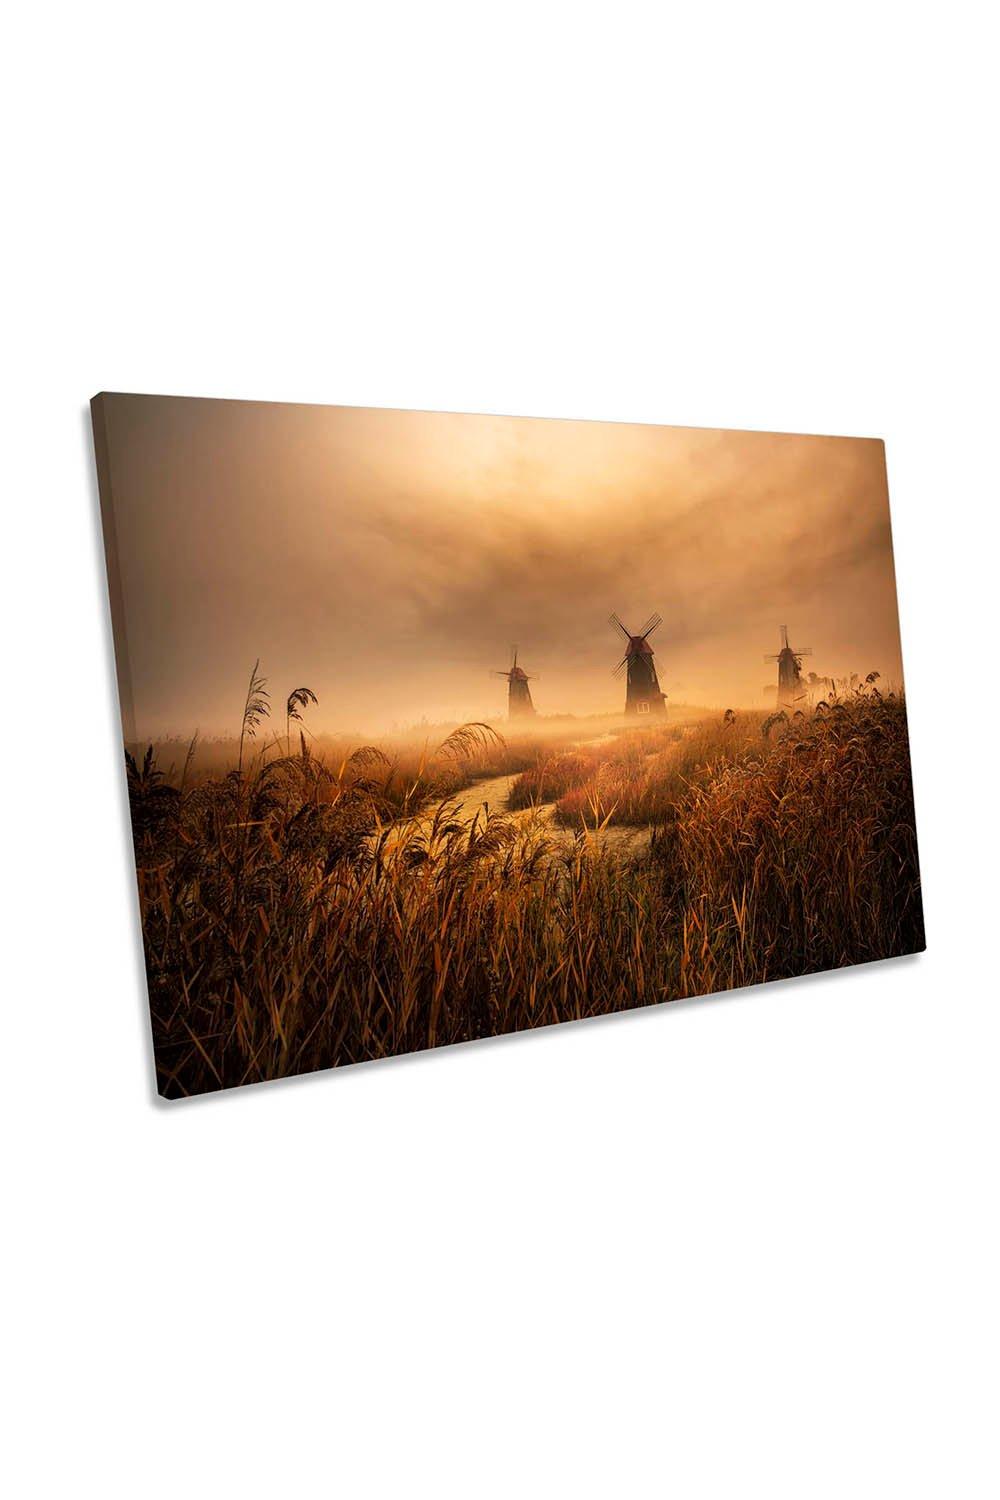 A Fascinating Morning Windmills Landscape Canvas Wall Art Picture Print